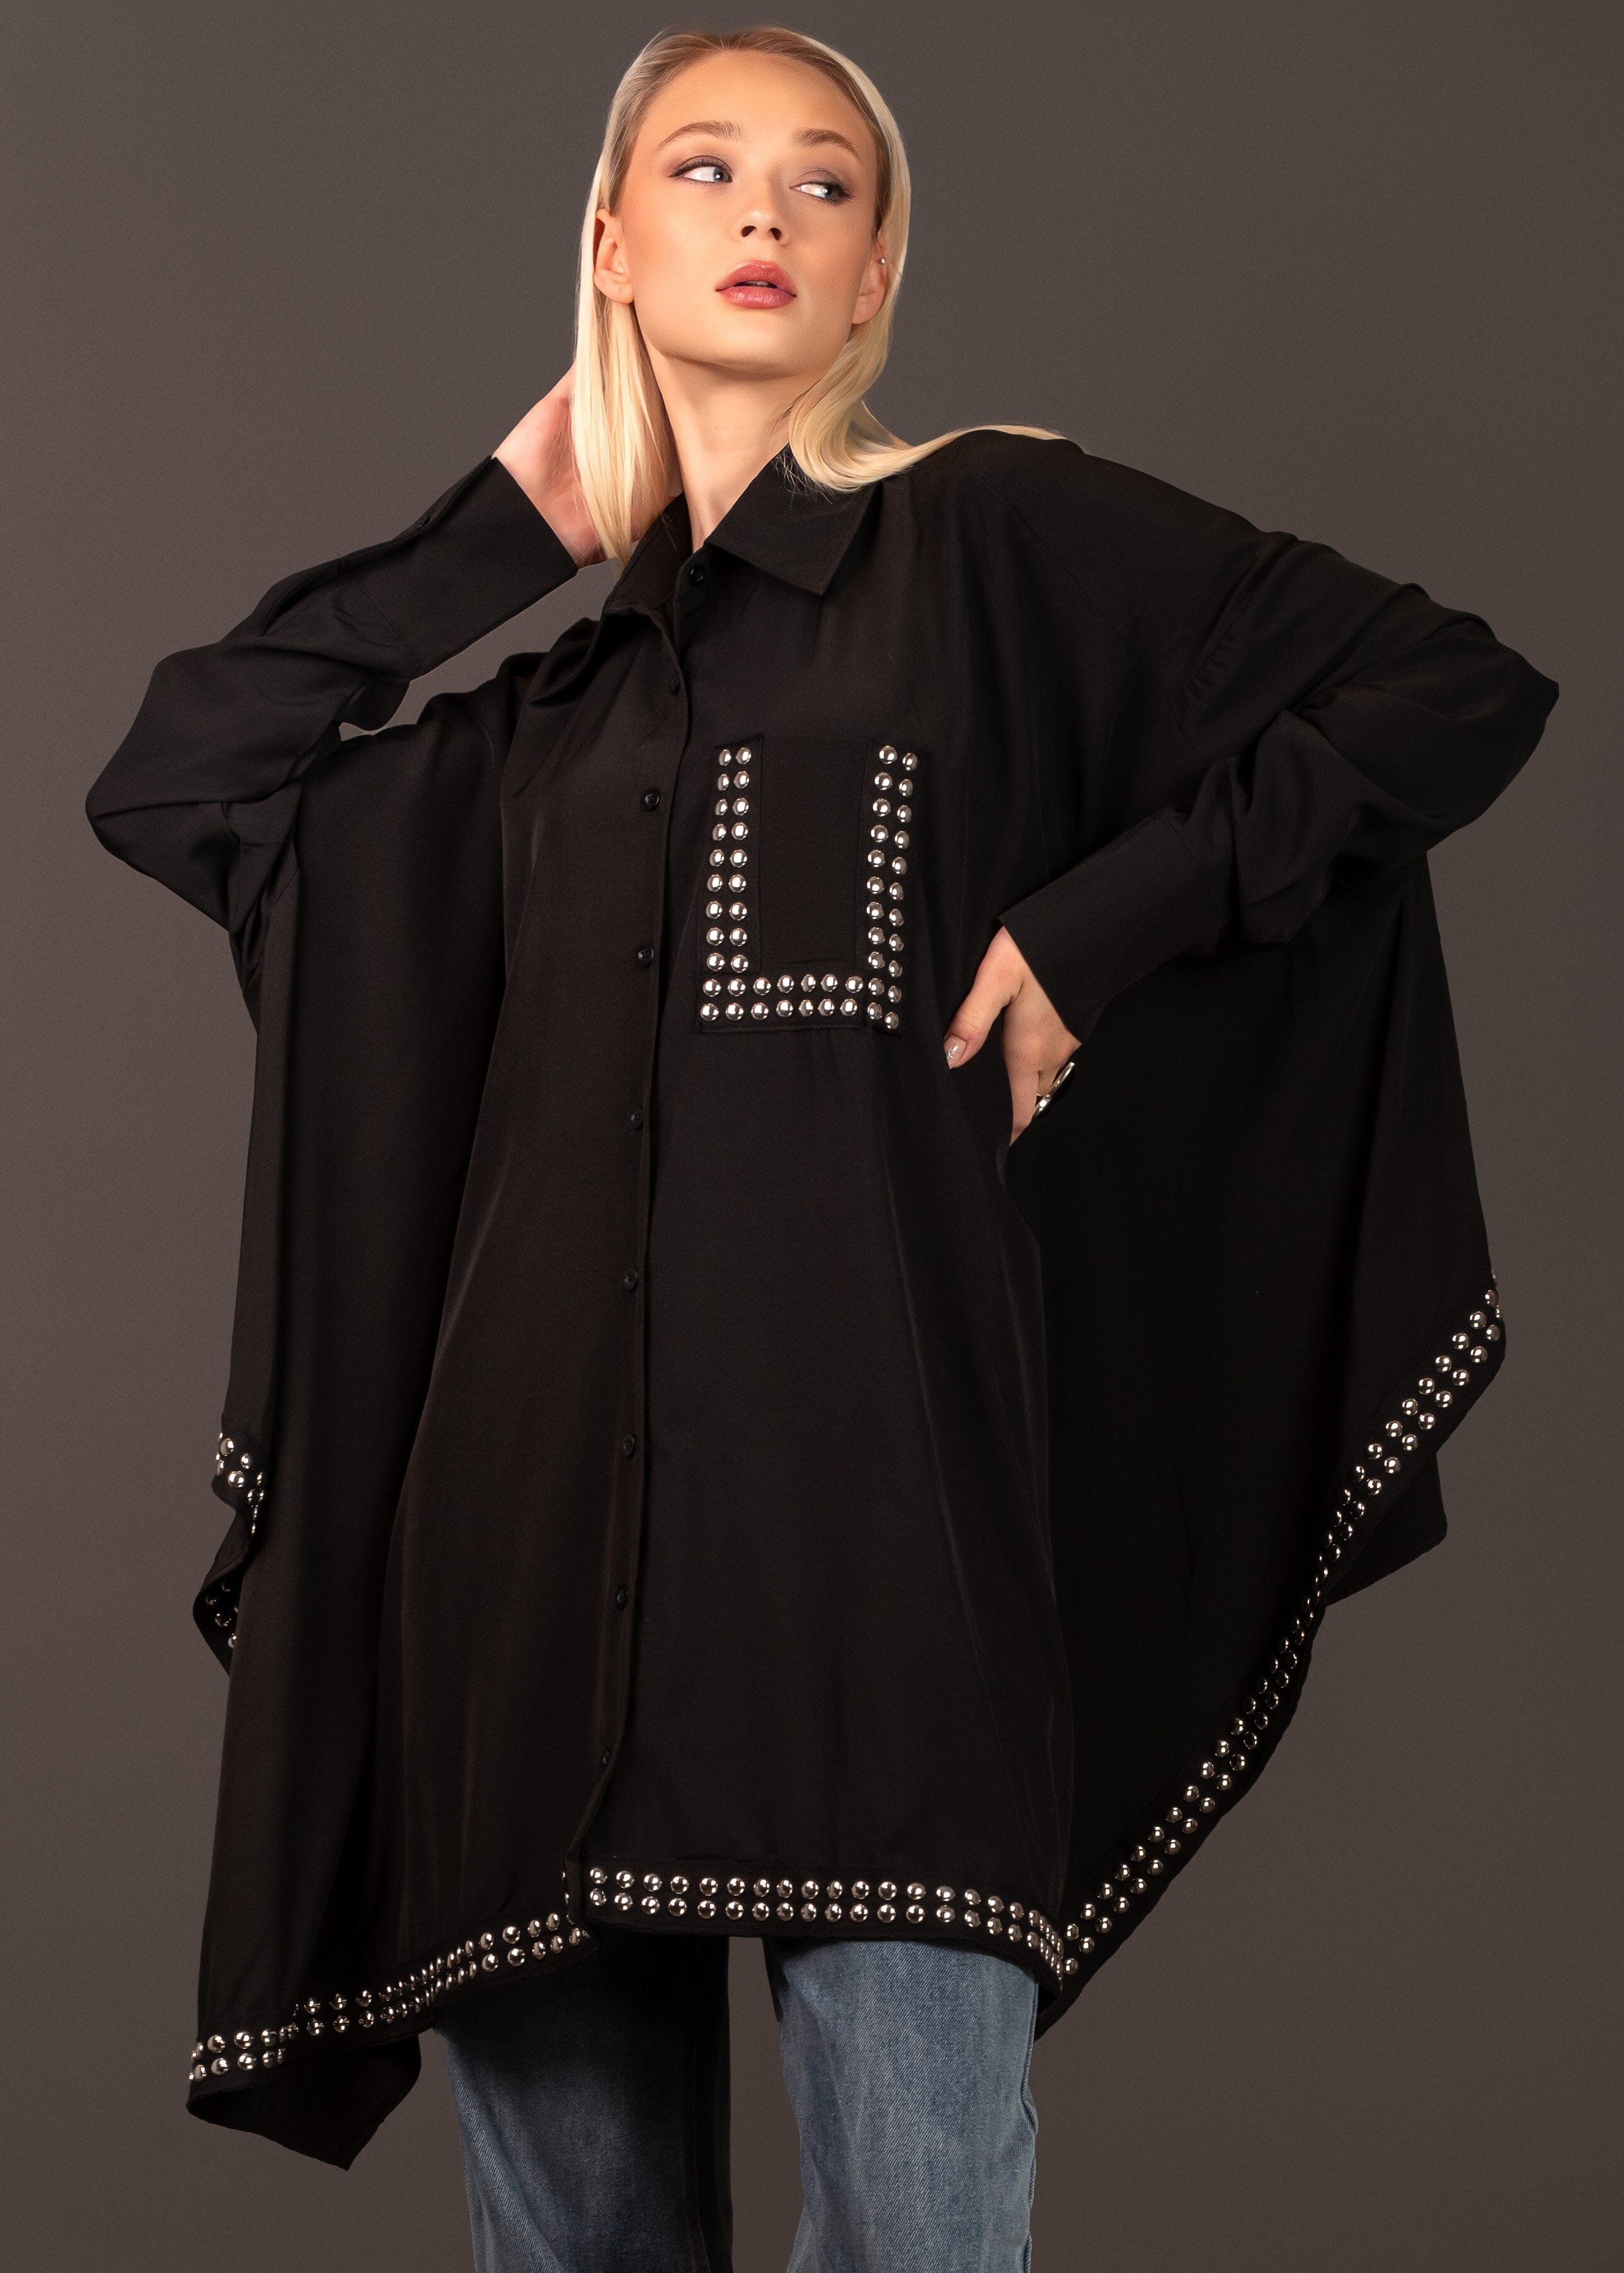 Studded Batwing Button Up Blouses Kate Hewko Black One Size 